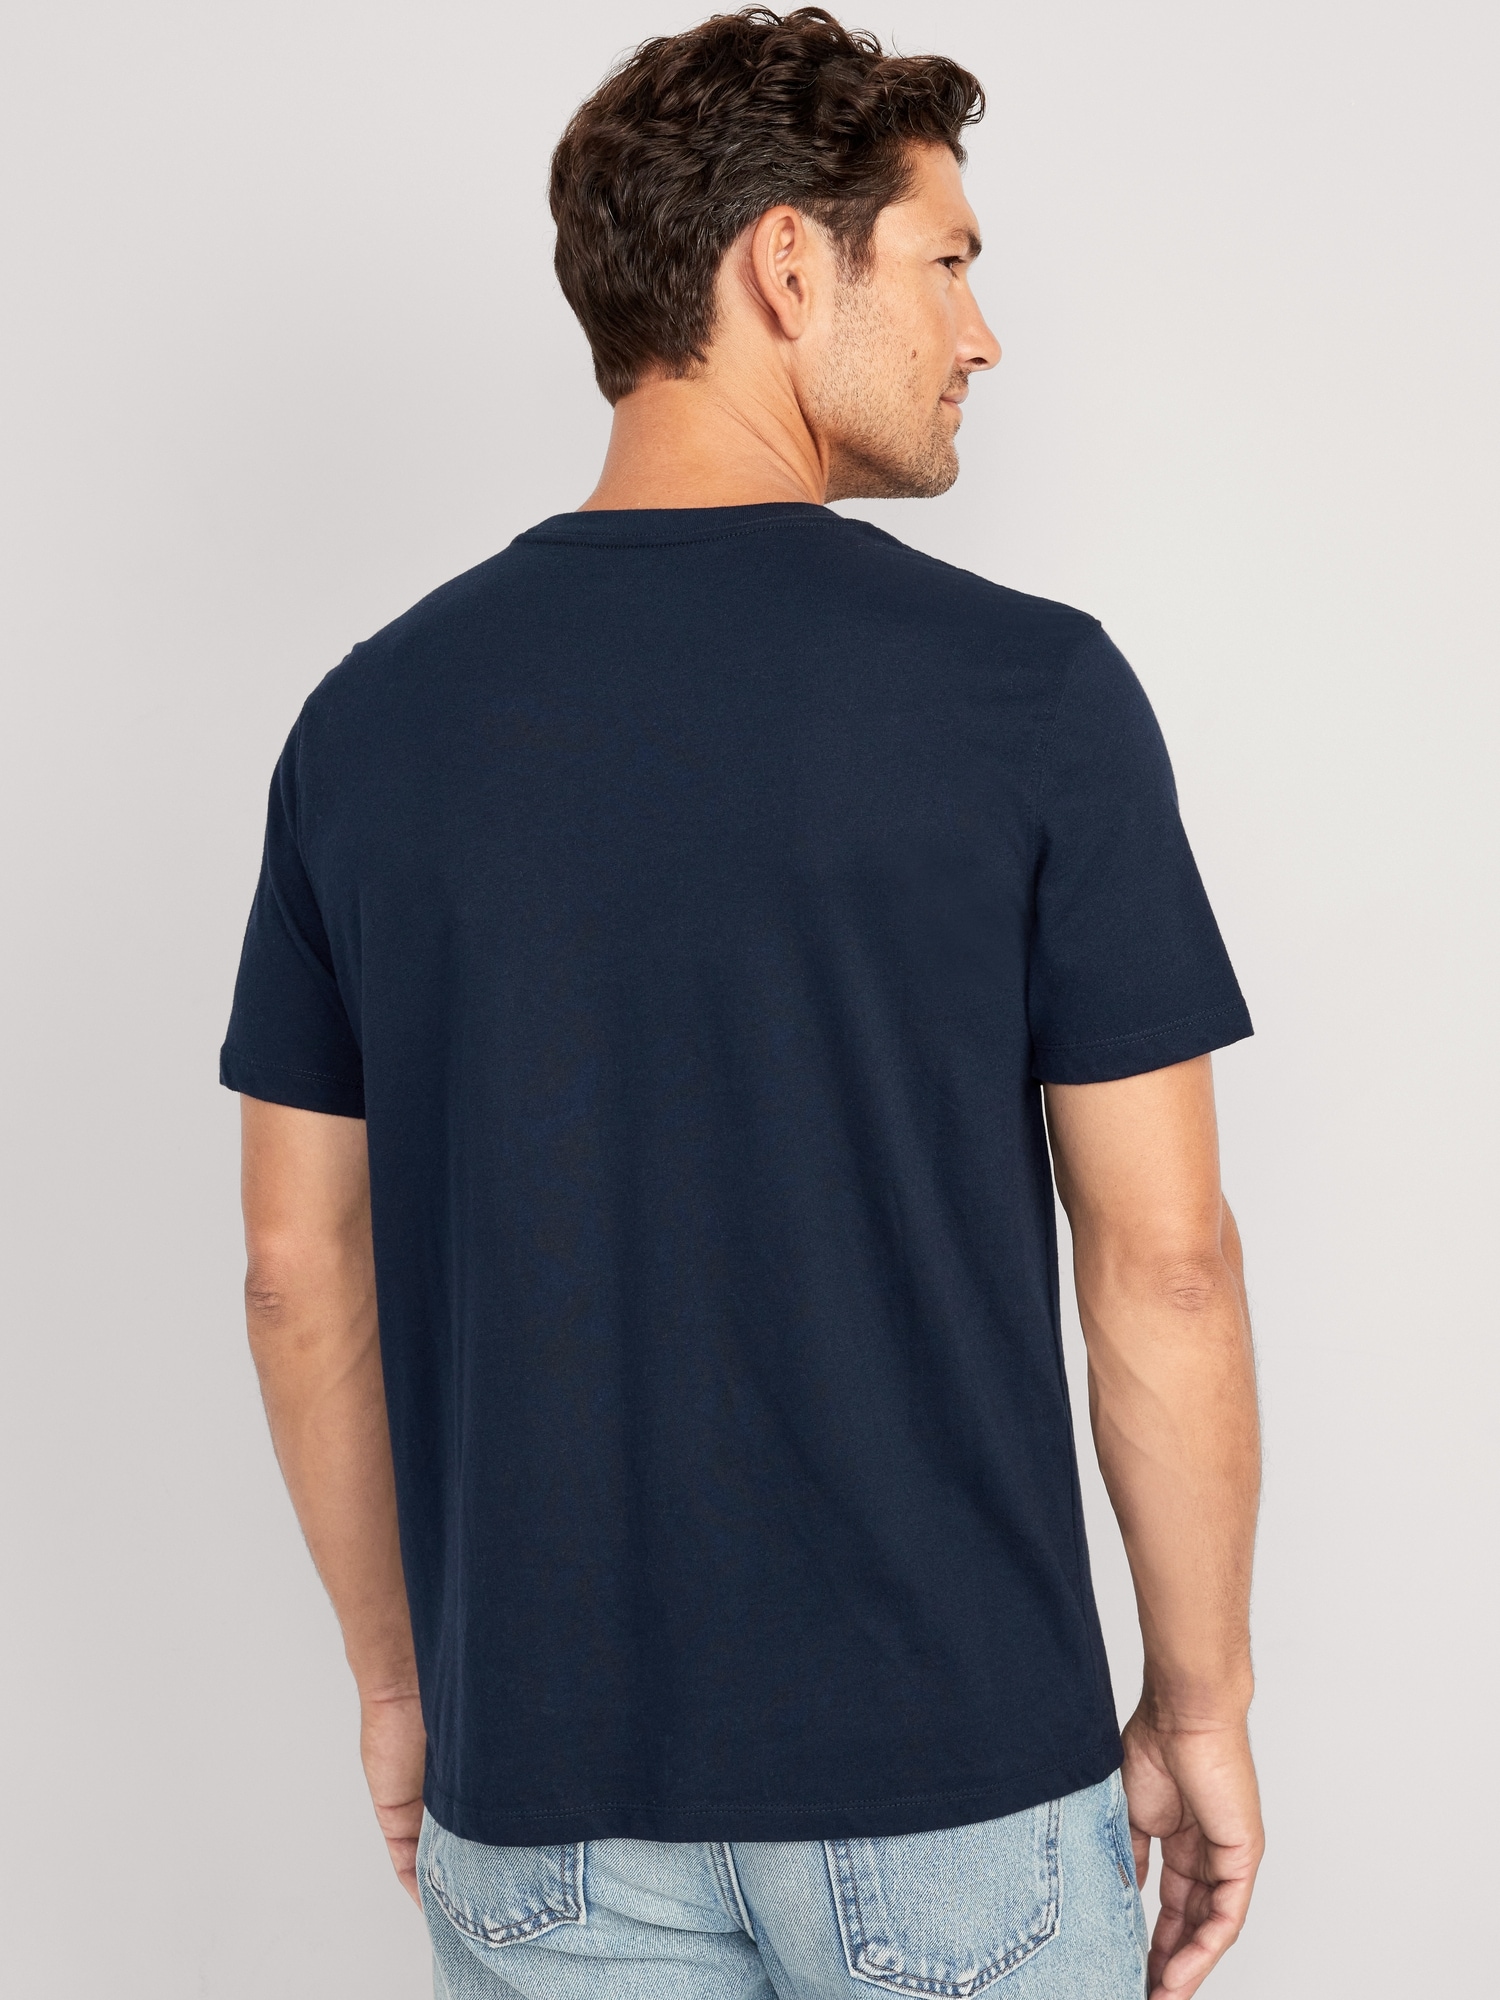 Old Navy Men's Soft-Washed Solid T-Shirt 5-Pack - - Tall Size XXXL